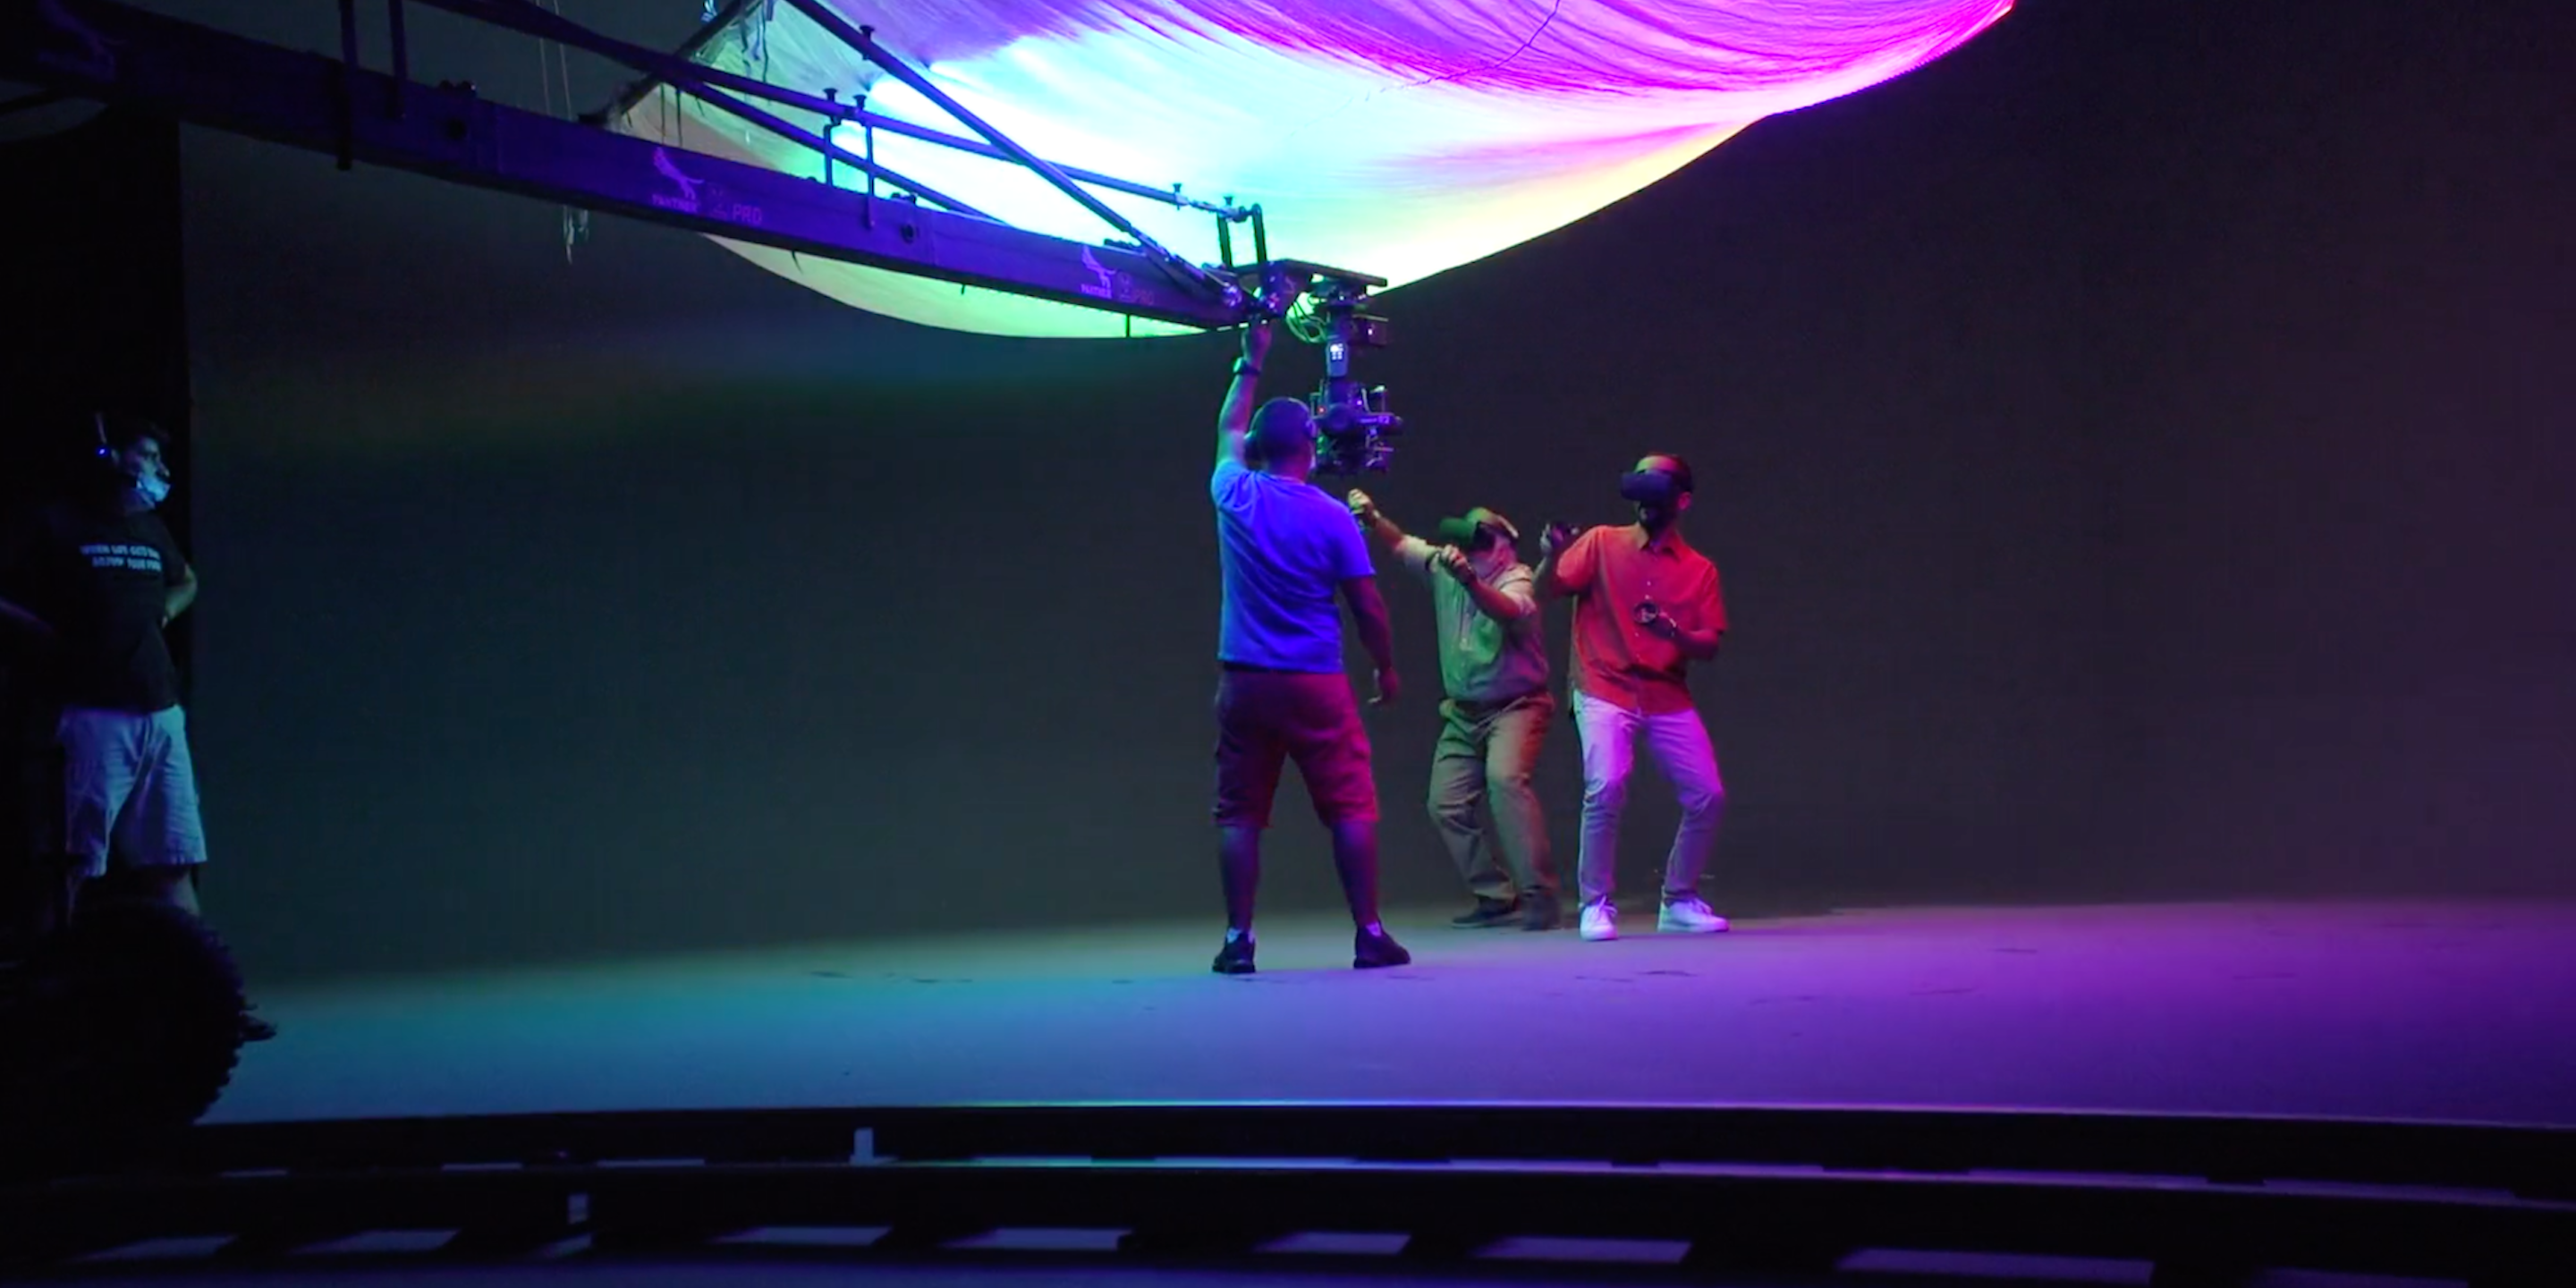 On set | electriclime° lights up Expo 2020 Dubai with Mastercard film